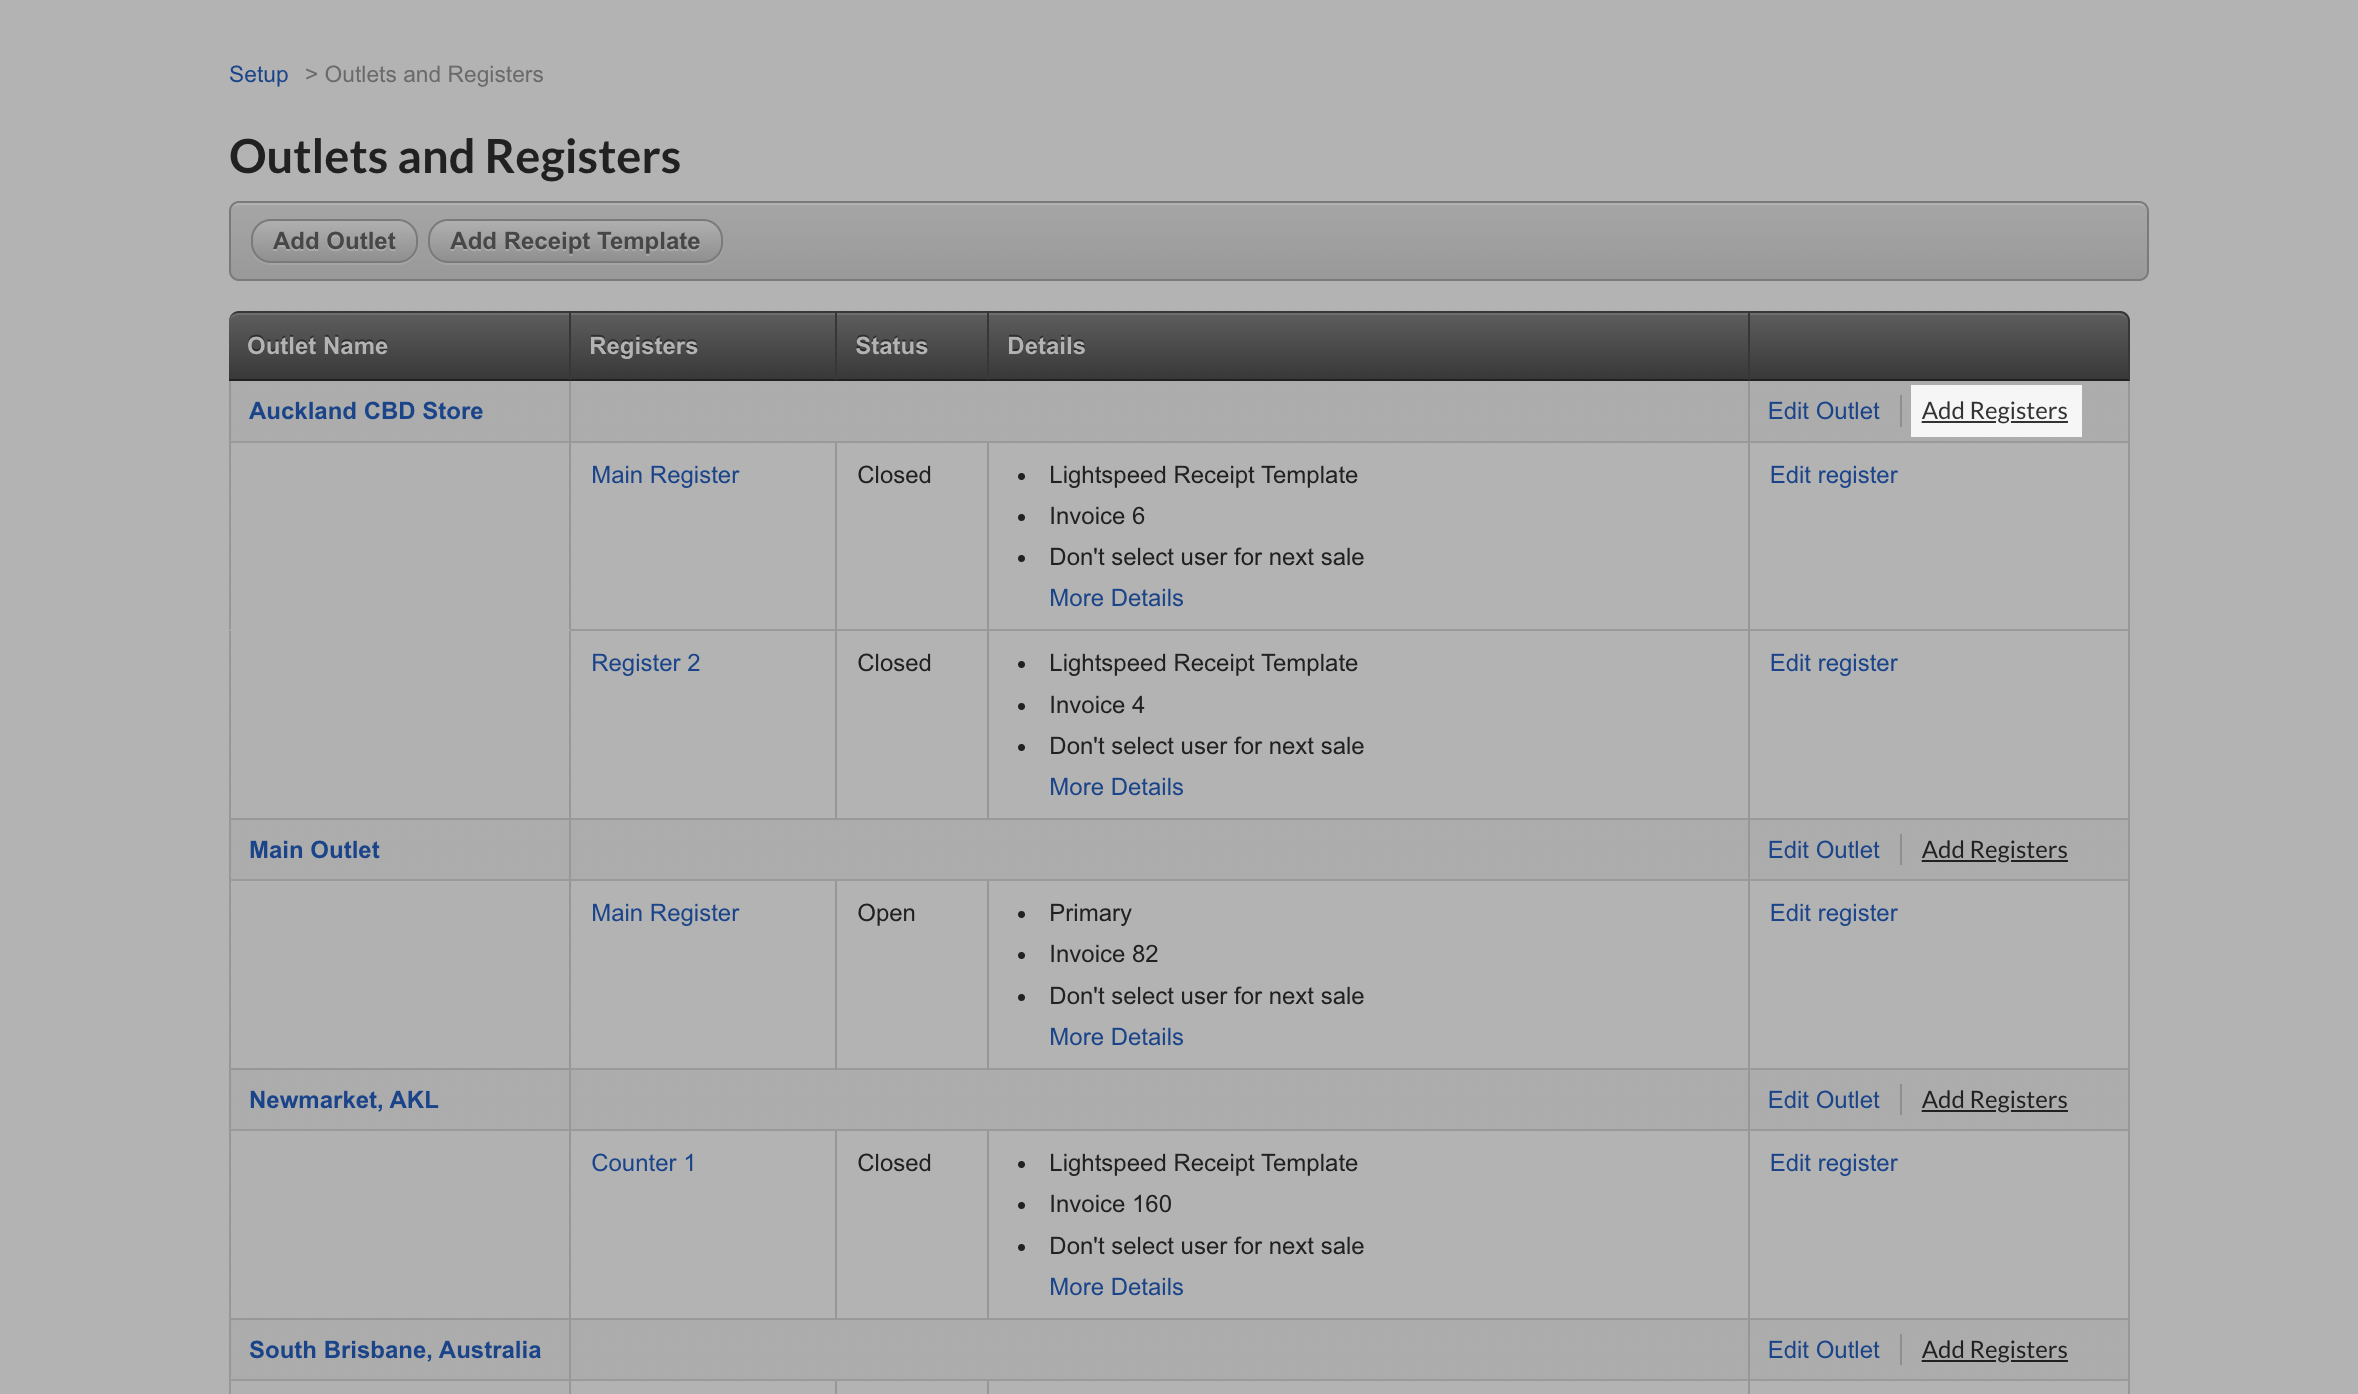 Outlets and Registers page with the Add Registers link highlighted.